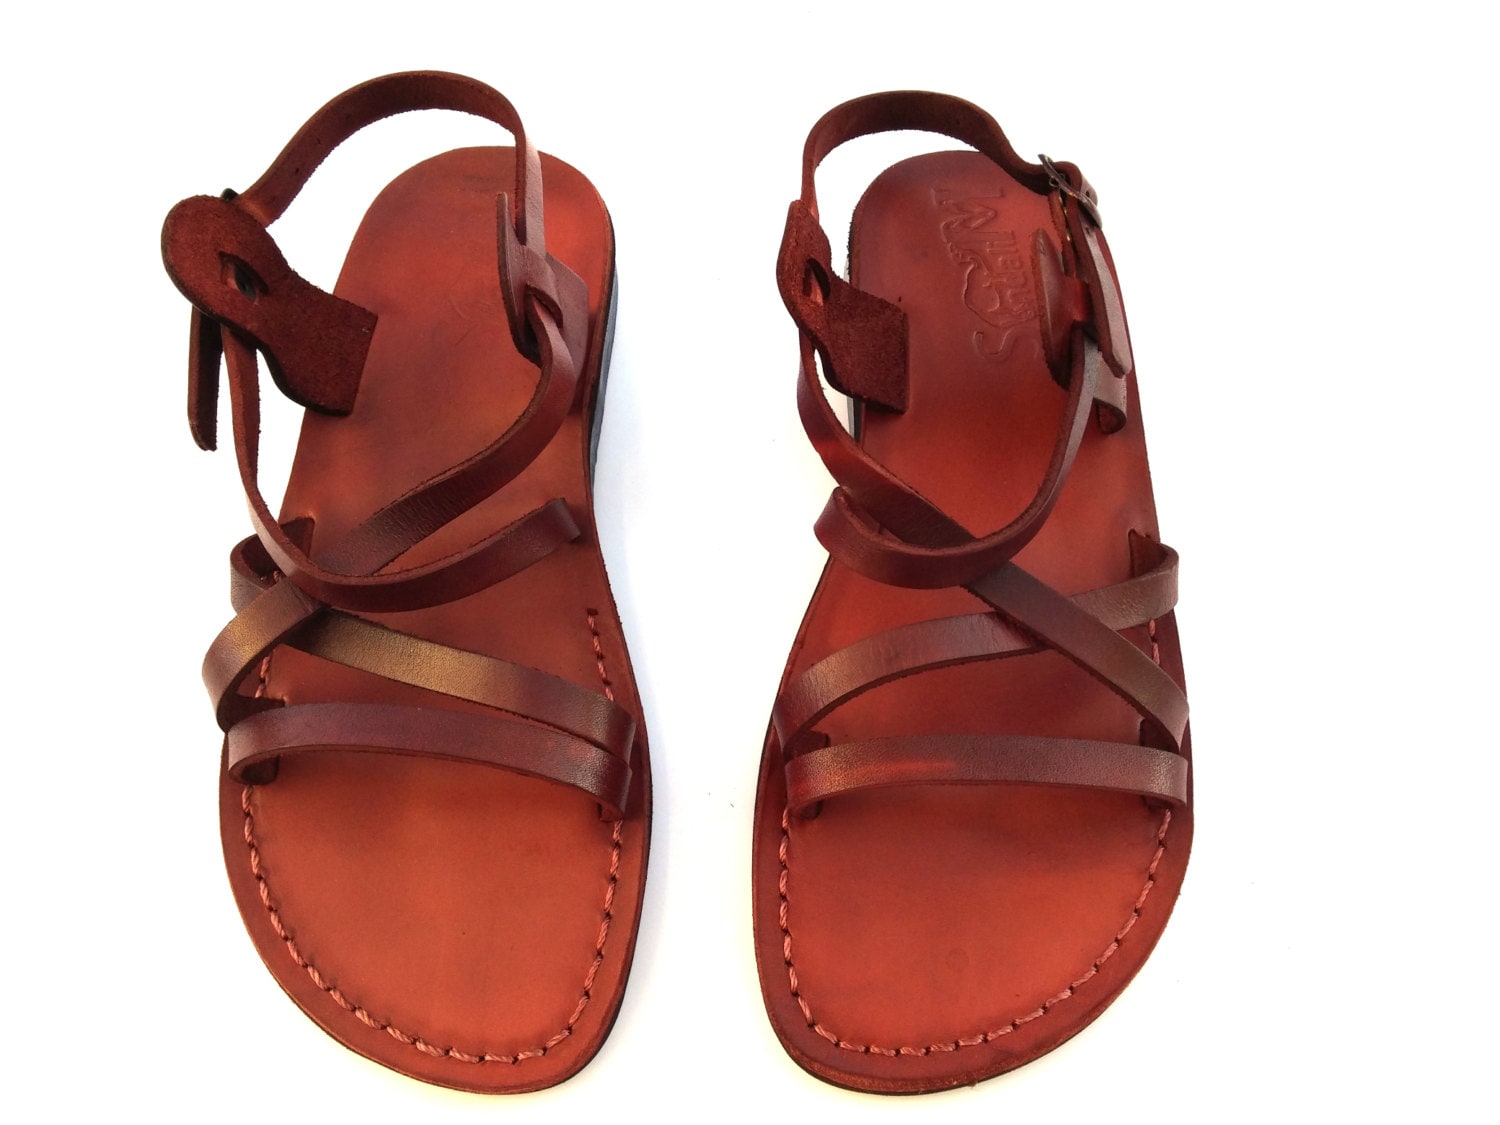 Brown Genuine Leather Strappy Sandals for Women Flip-Flops